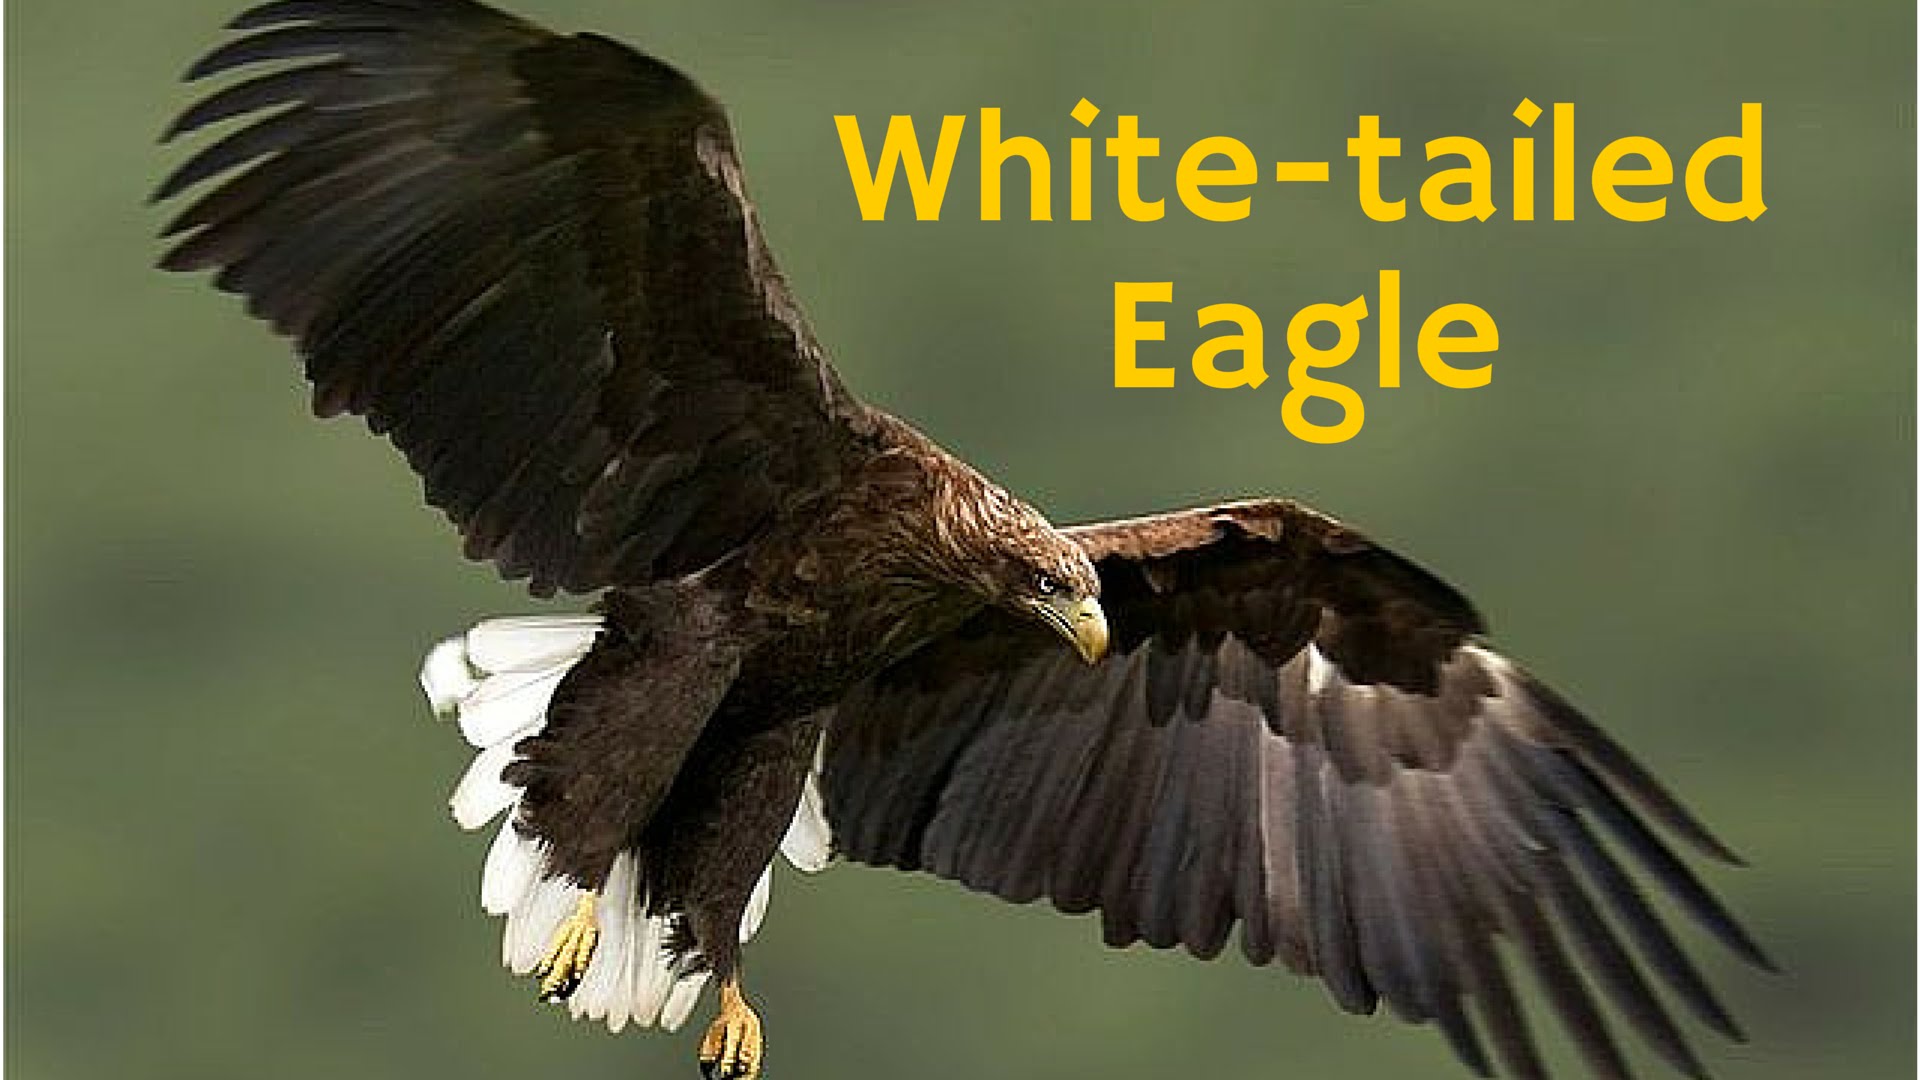 Amazing White-tailed Eagle Pictures & Backgrounds